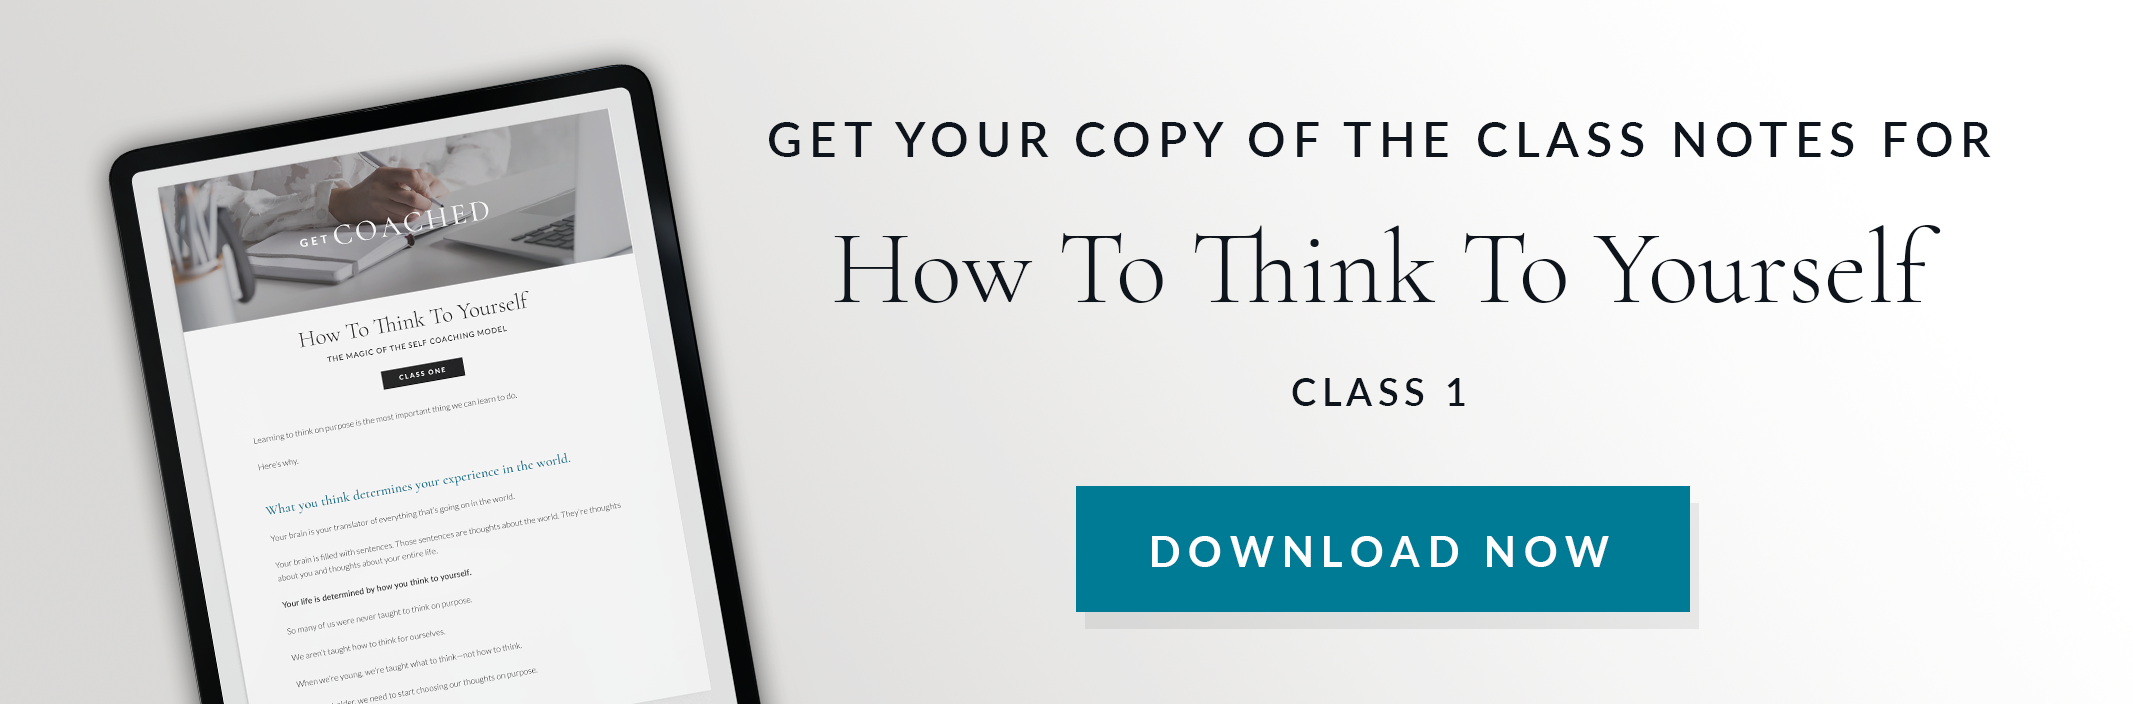 How to think to yourself Class 1